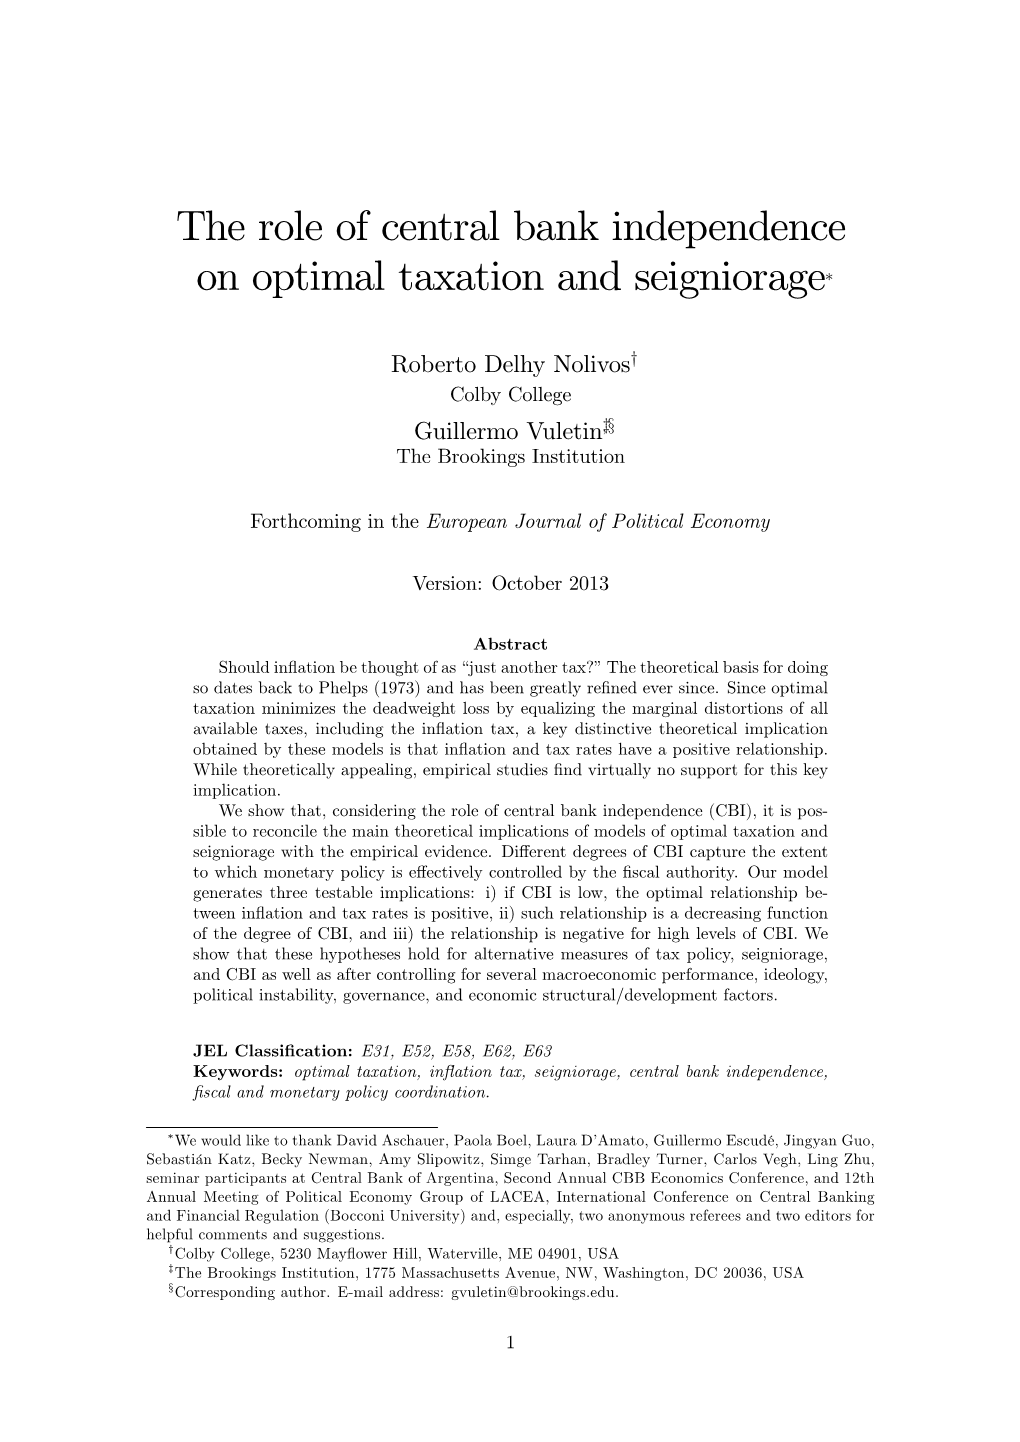 The Role of Central Bank Independence on Optimal Taxation and Seigniorage"